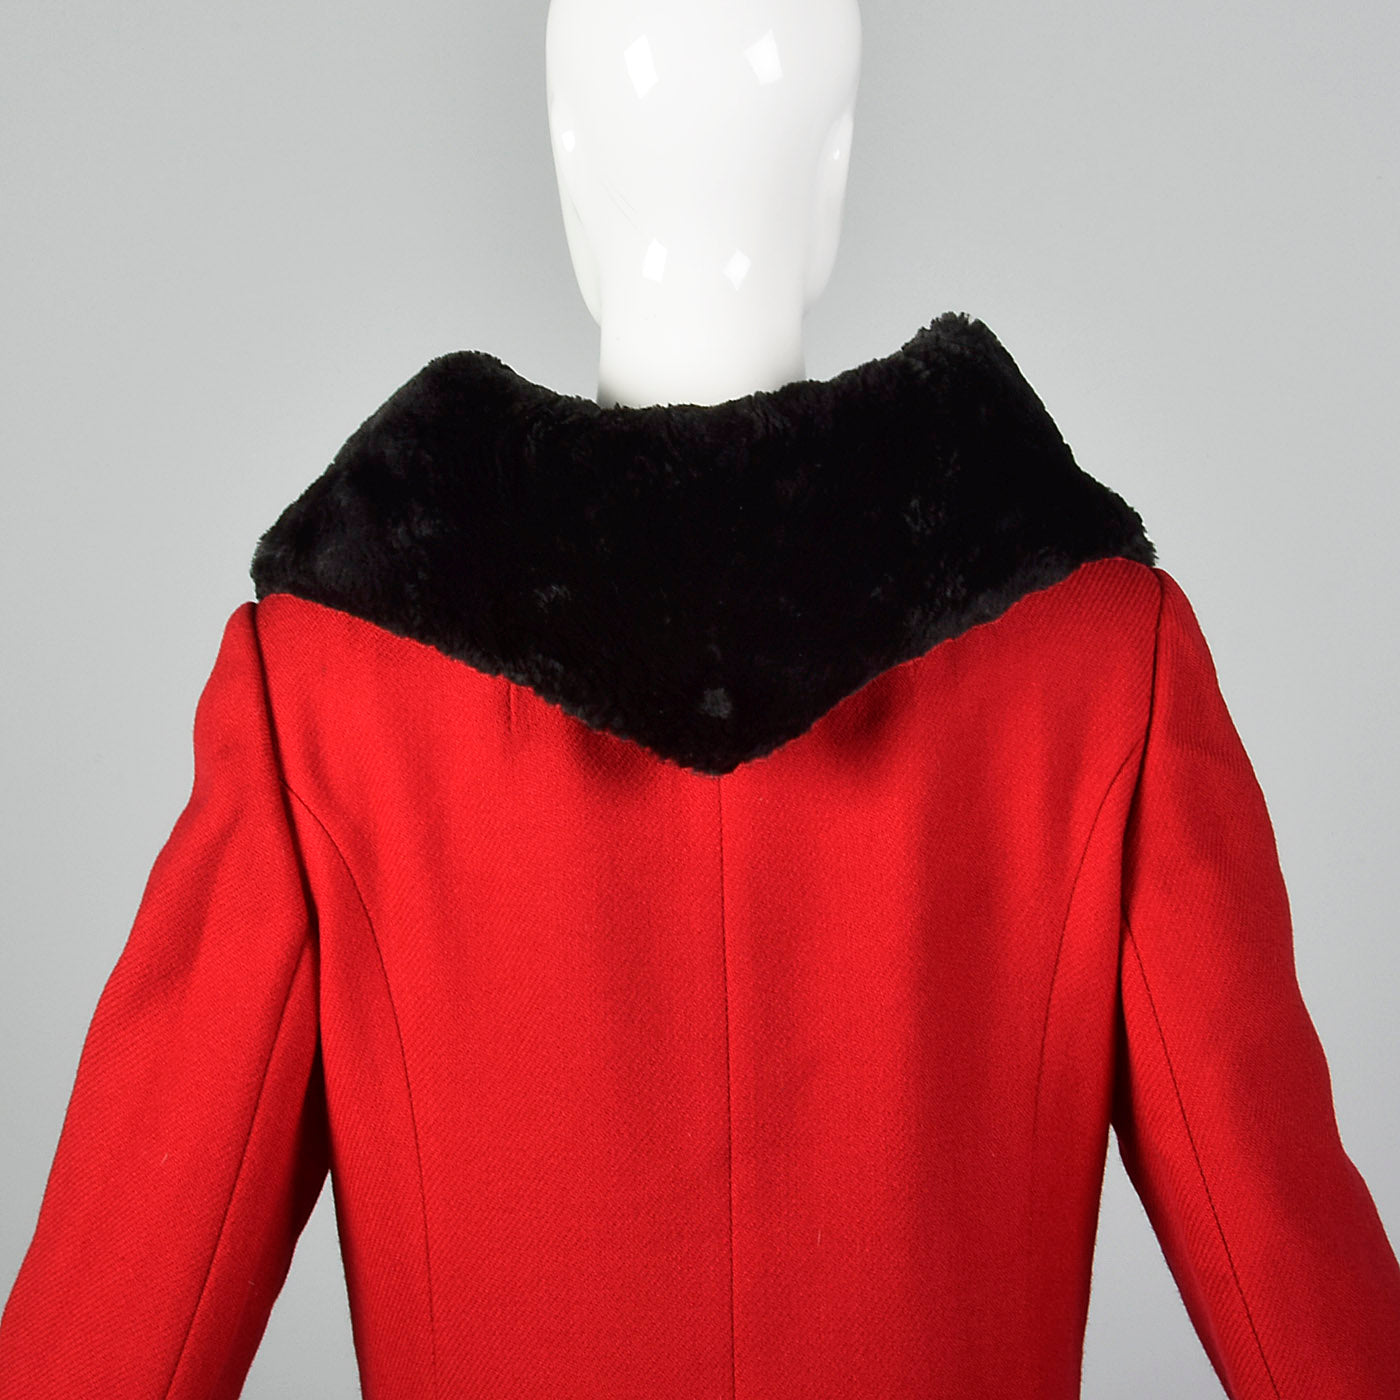 1960s Red Wool Coat with Sheared Fur Collar